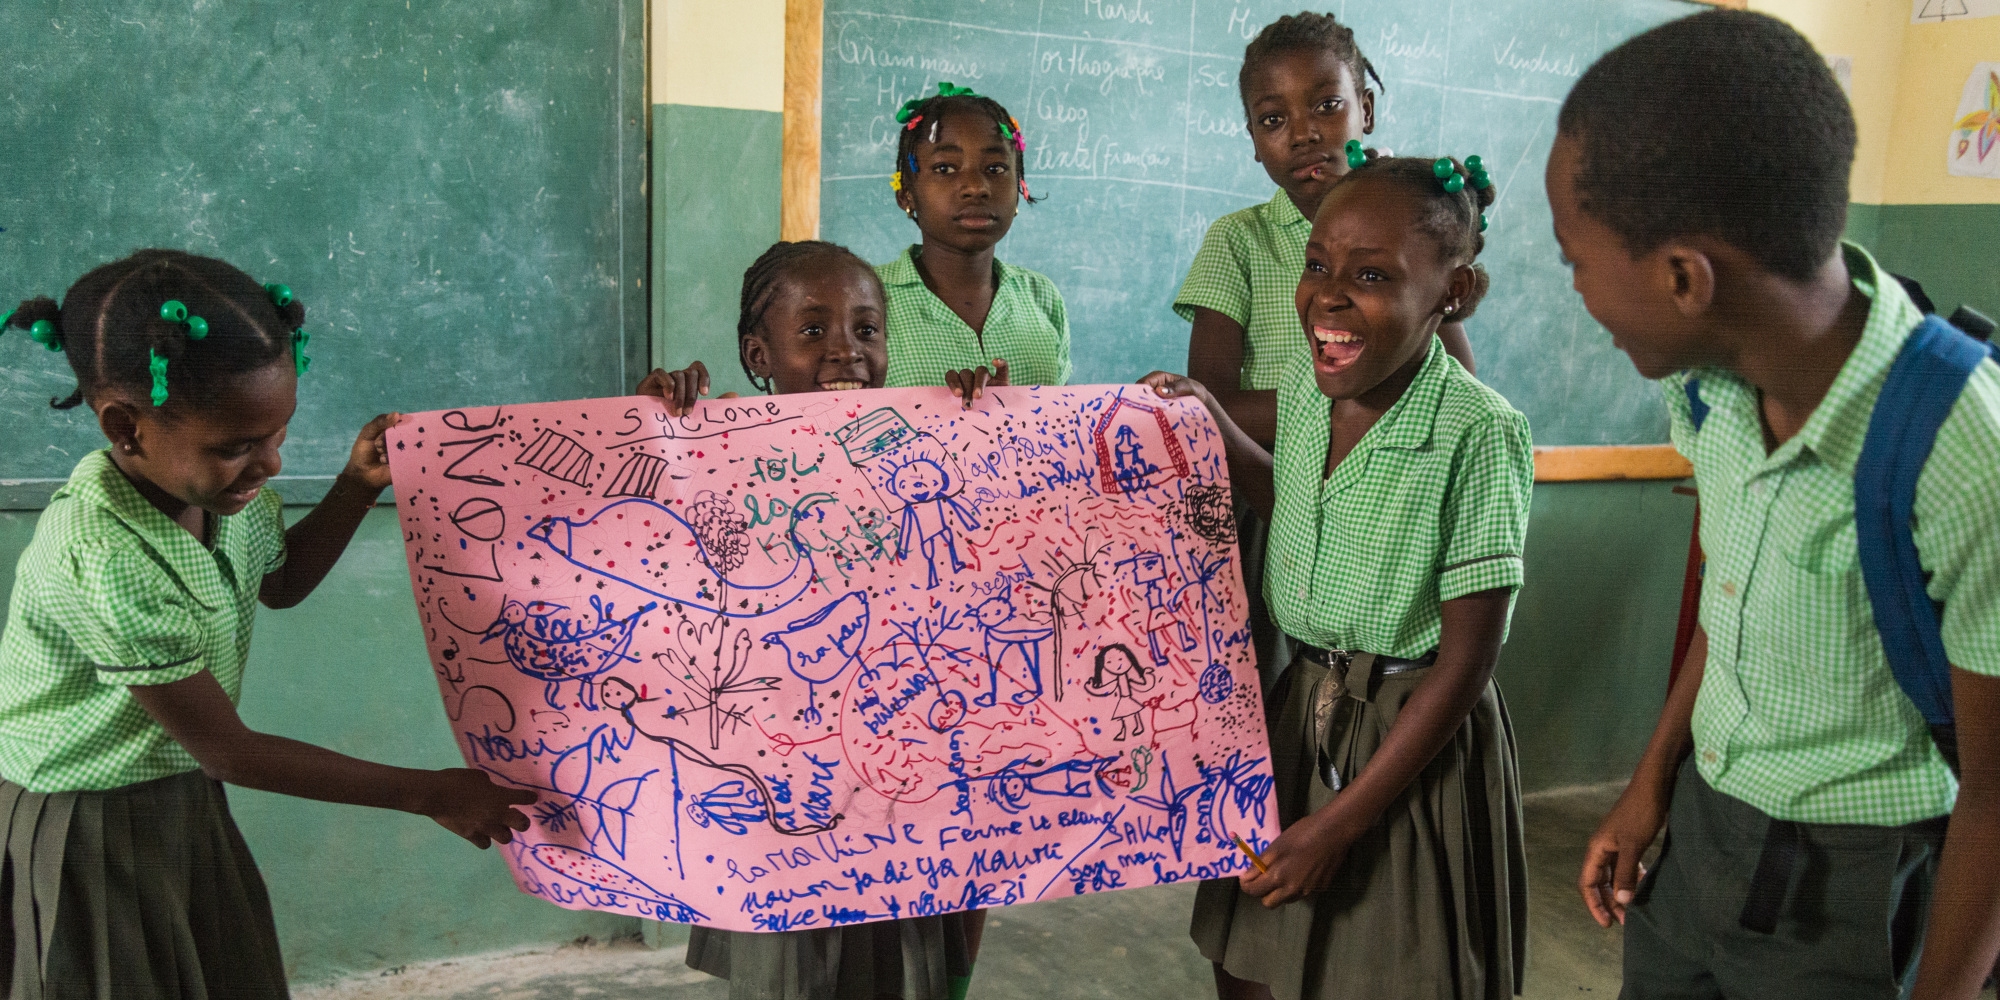 A group of children explain a picture that they drew showing what they experienced during Hurricane Matthew, at the Child Friendly Space at a school. Photo credit: Ray-ginald Louissaint Jr / Save the Children 2018.